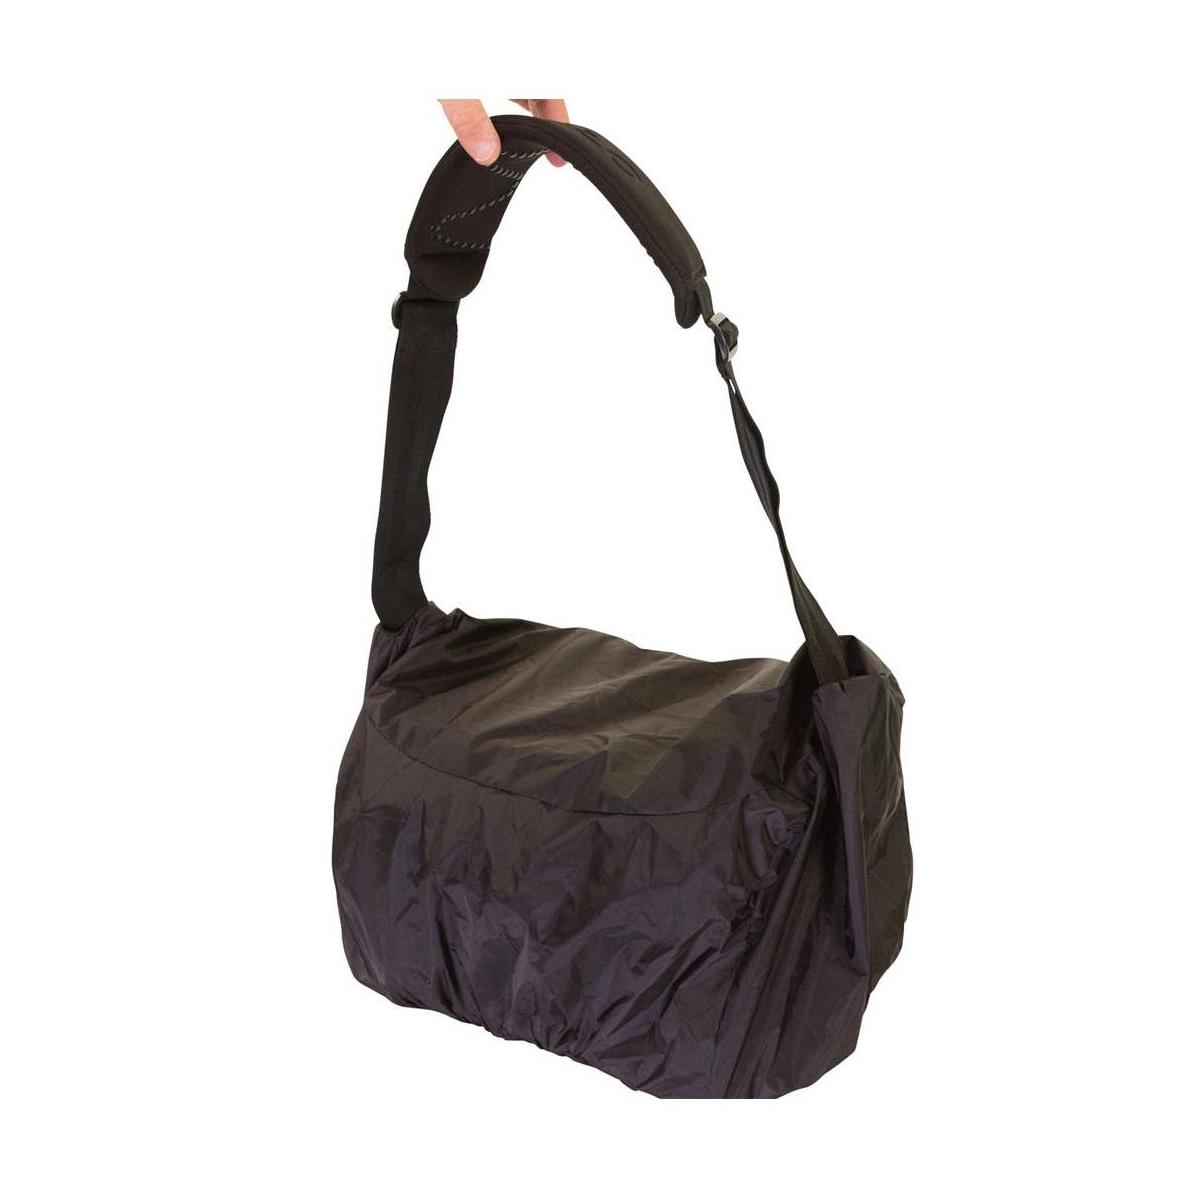 Image of Orca OR-33 Audio Bag Environmental Cover for OR-30 Orca Audio Bag